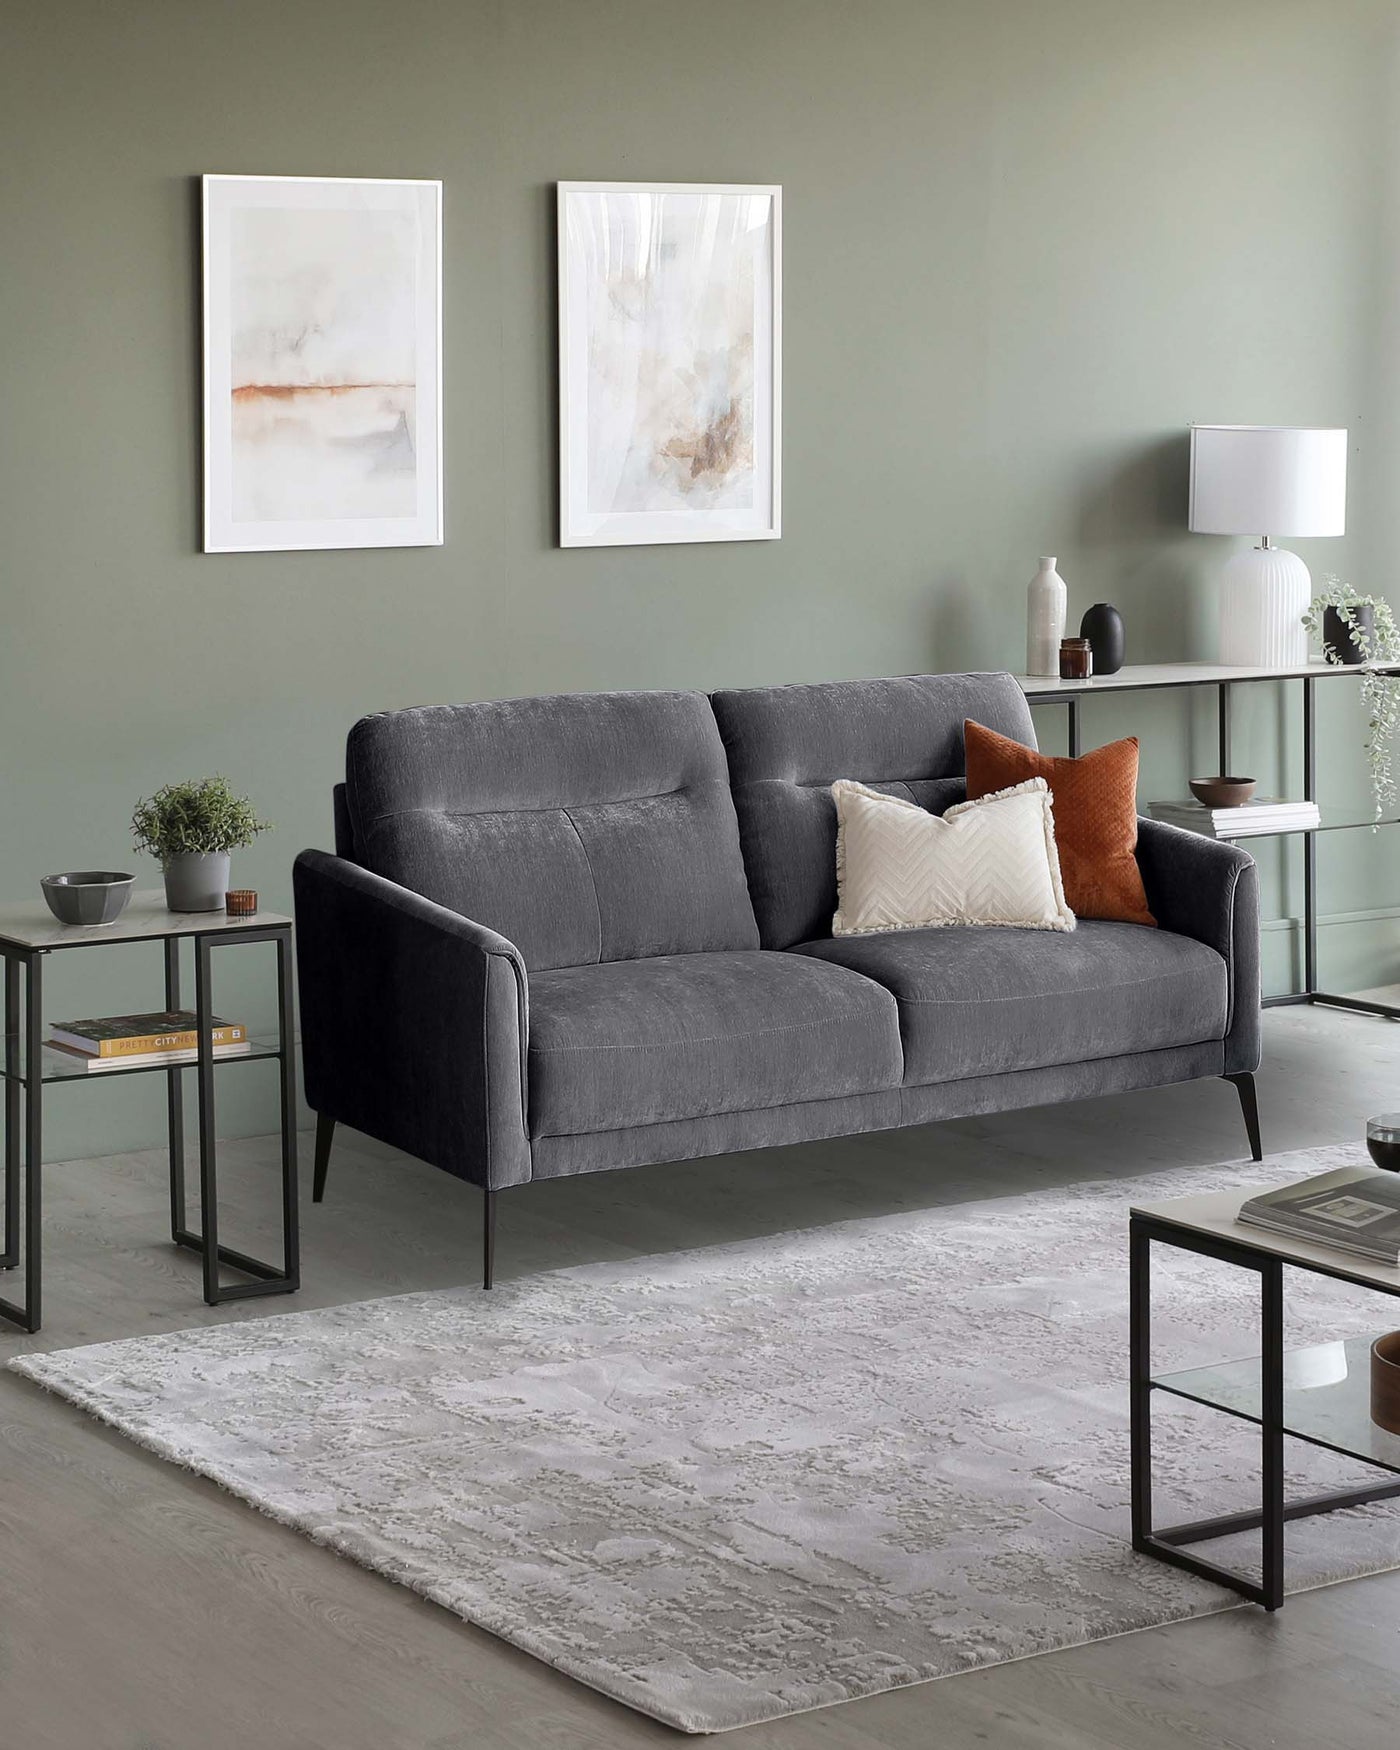 A contemporary, charcoal grey upholstered sofa with a tufted backrest and boxy armrests, featuring neutral-toned accent pillows. Positioned on a textured ivory area rug, the setting includes two minimalist black metal end tables with glass tops and a matching coffee table with a clear glass inset and a lower shelf. An understated off-white table lamp with a cylindrical shade adorns one end table, complementing the modern aesthetic of the room.